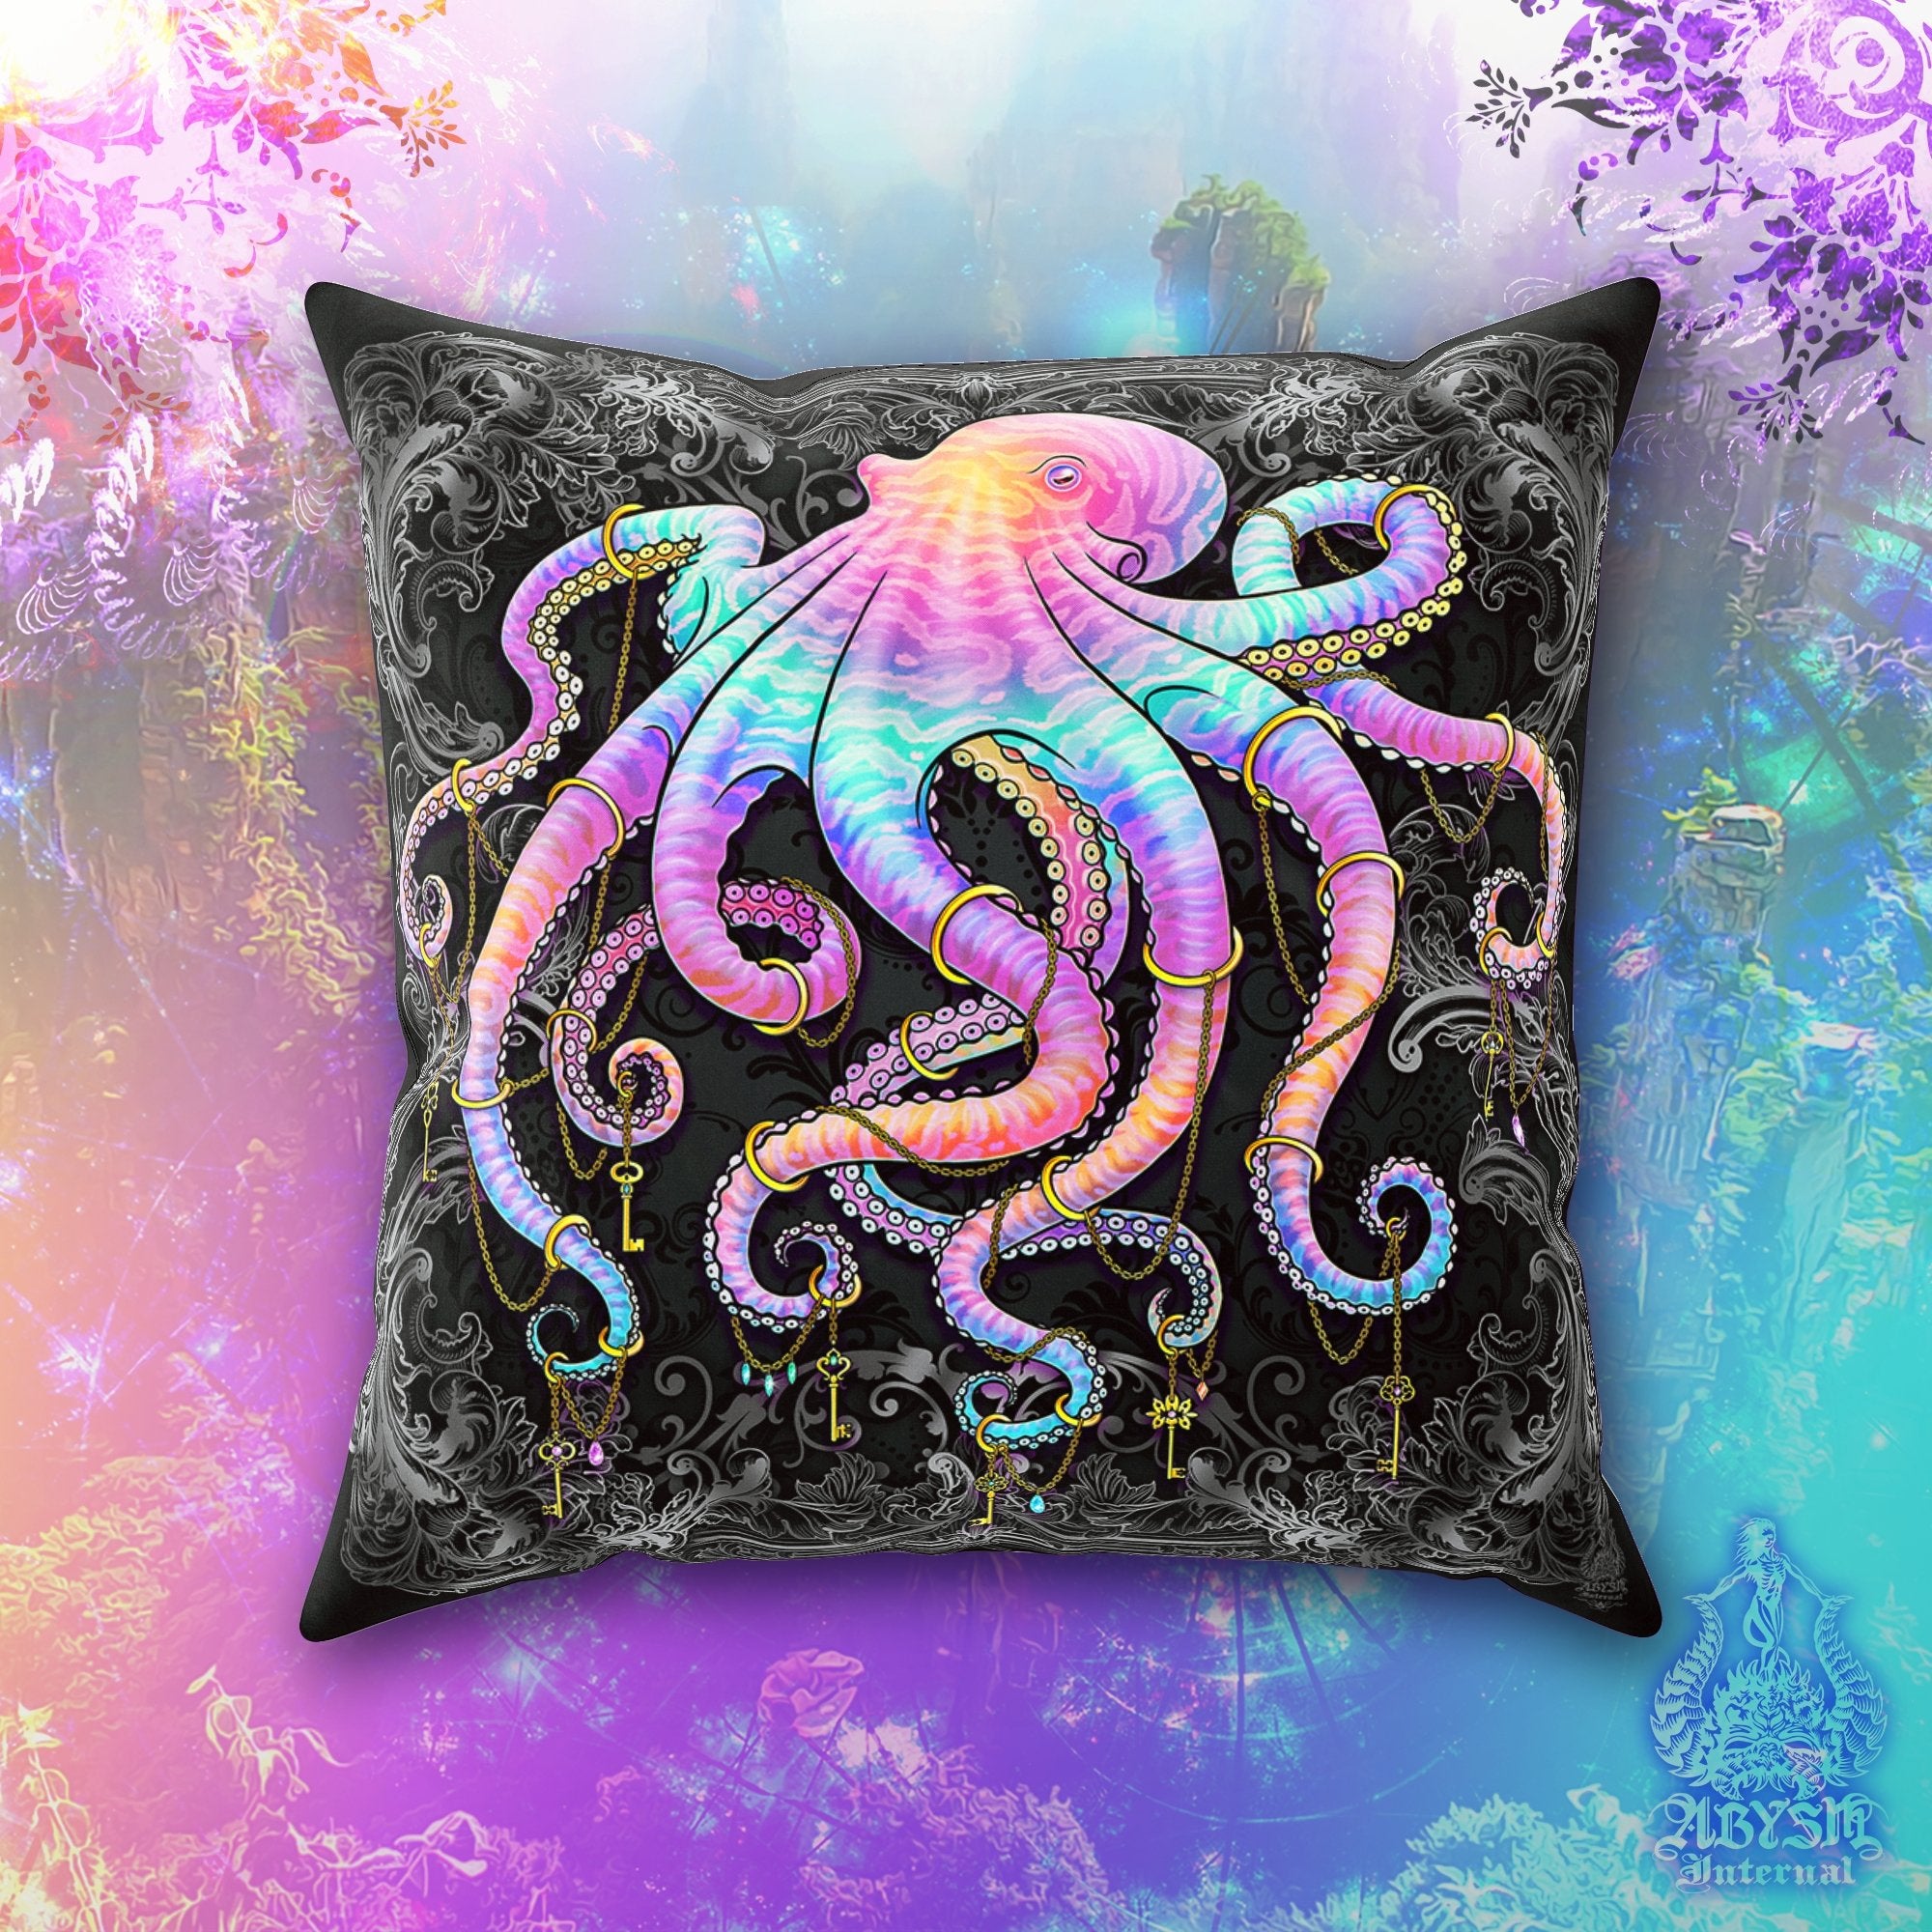 Indie Throw Pillow, Decorative Accent Cushion, Eclectic Beach Decor, Funky Home - Dark Pastel Punk Octopus - Abysm Internal